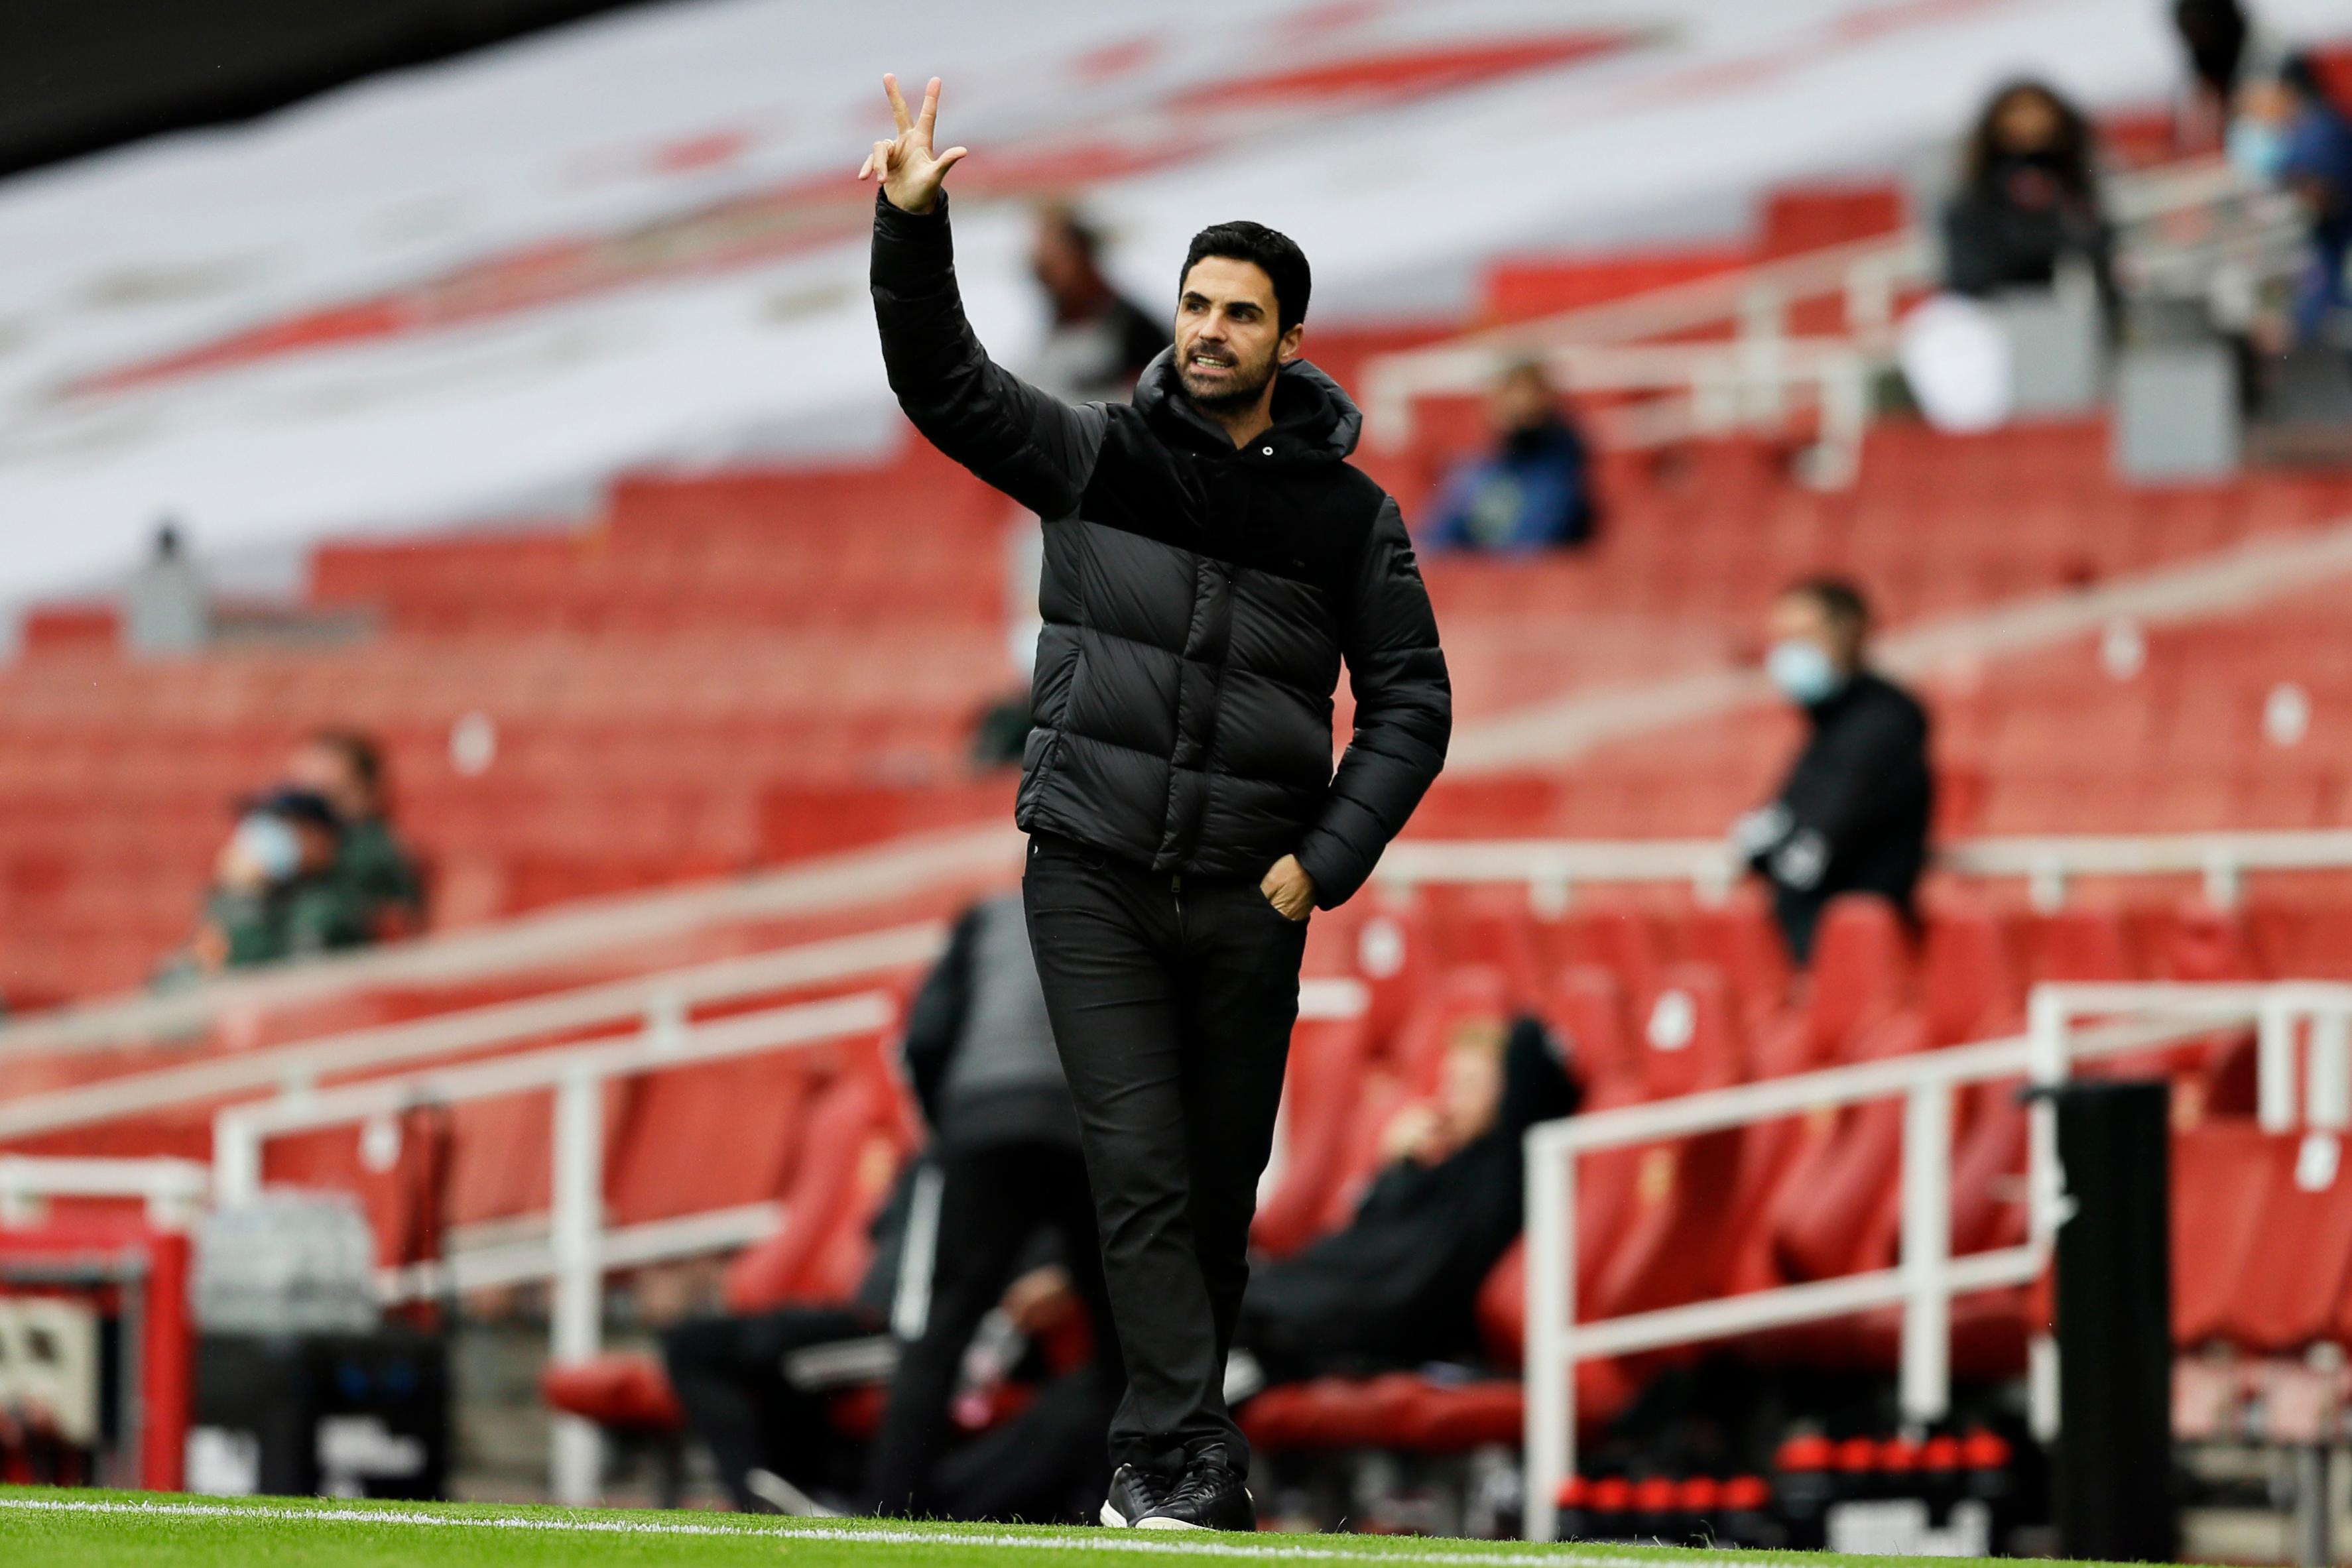 Arsenal have always been targeting best players in world, proclaims Mikel Arteta